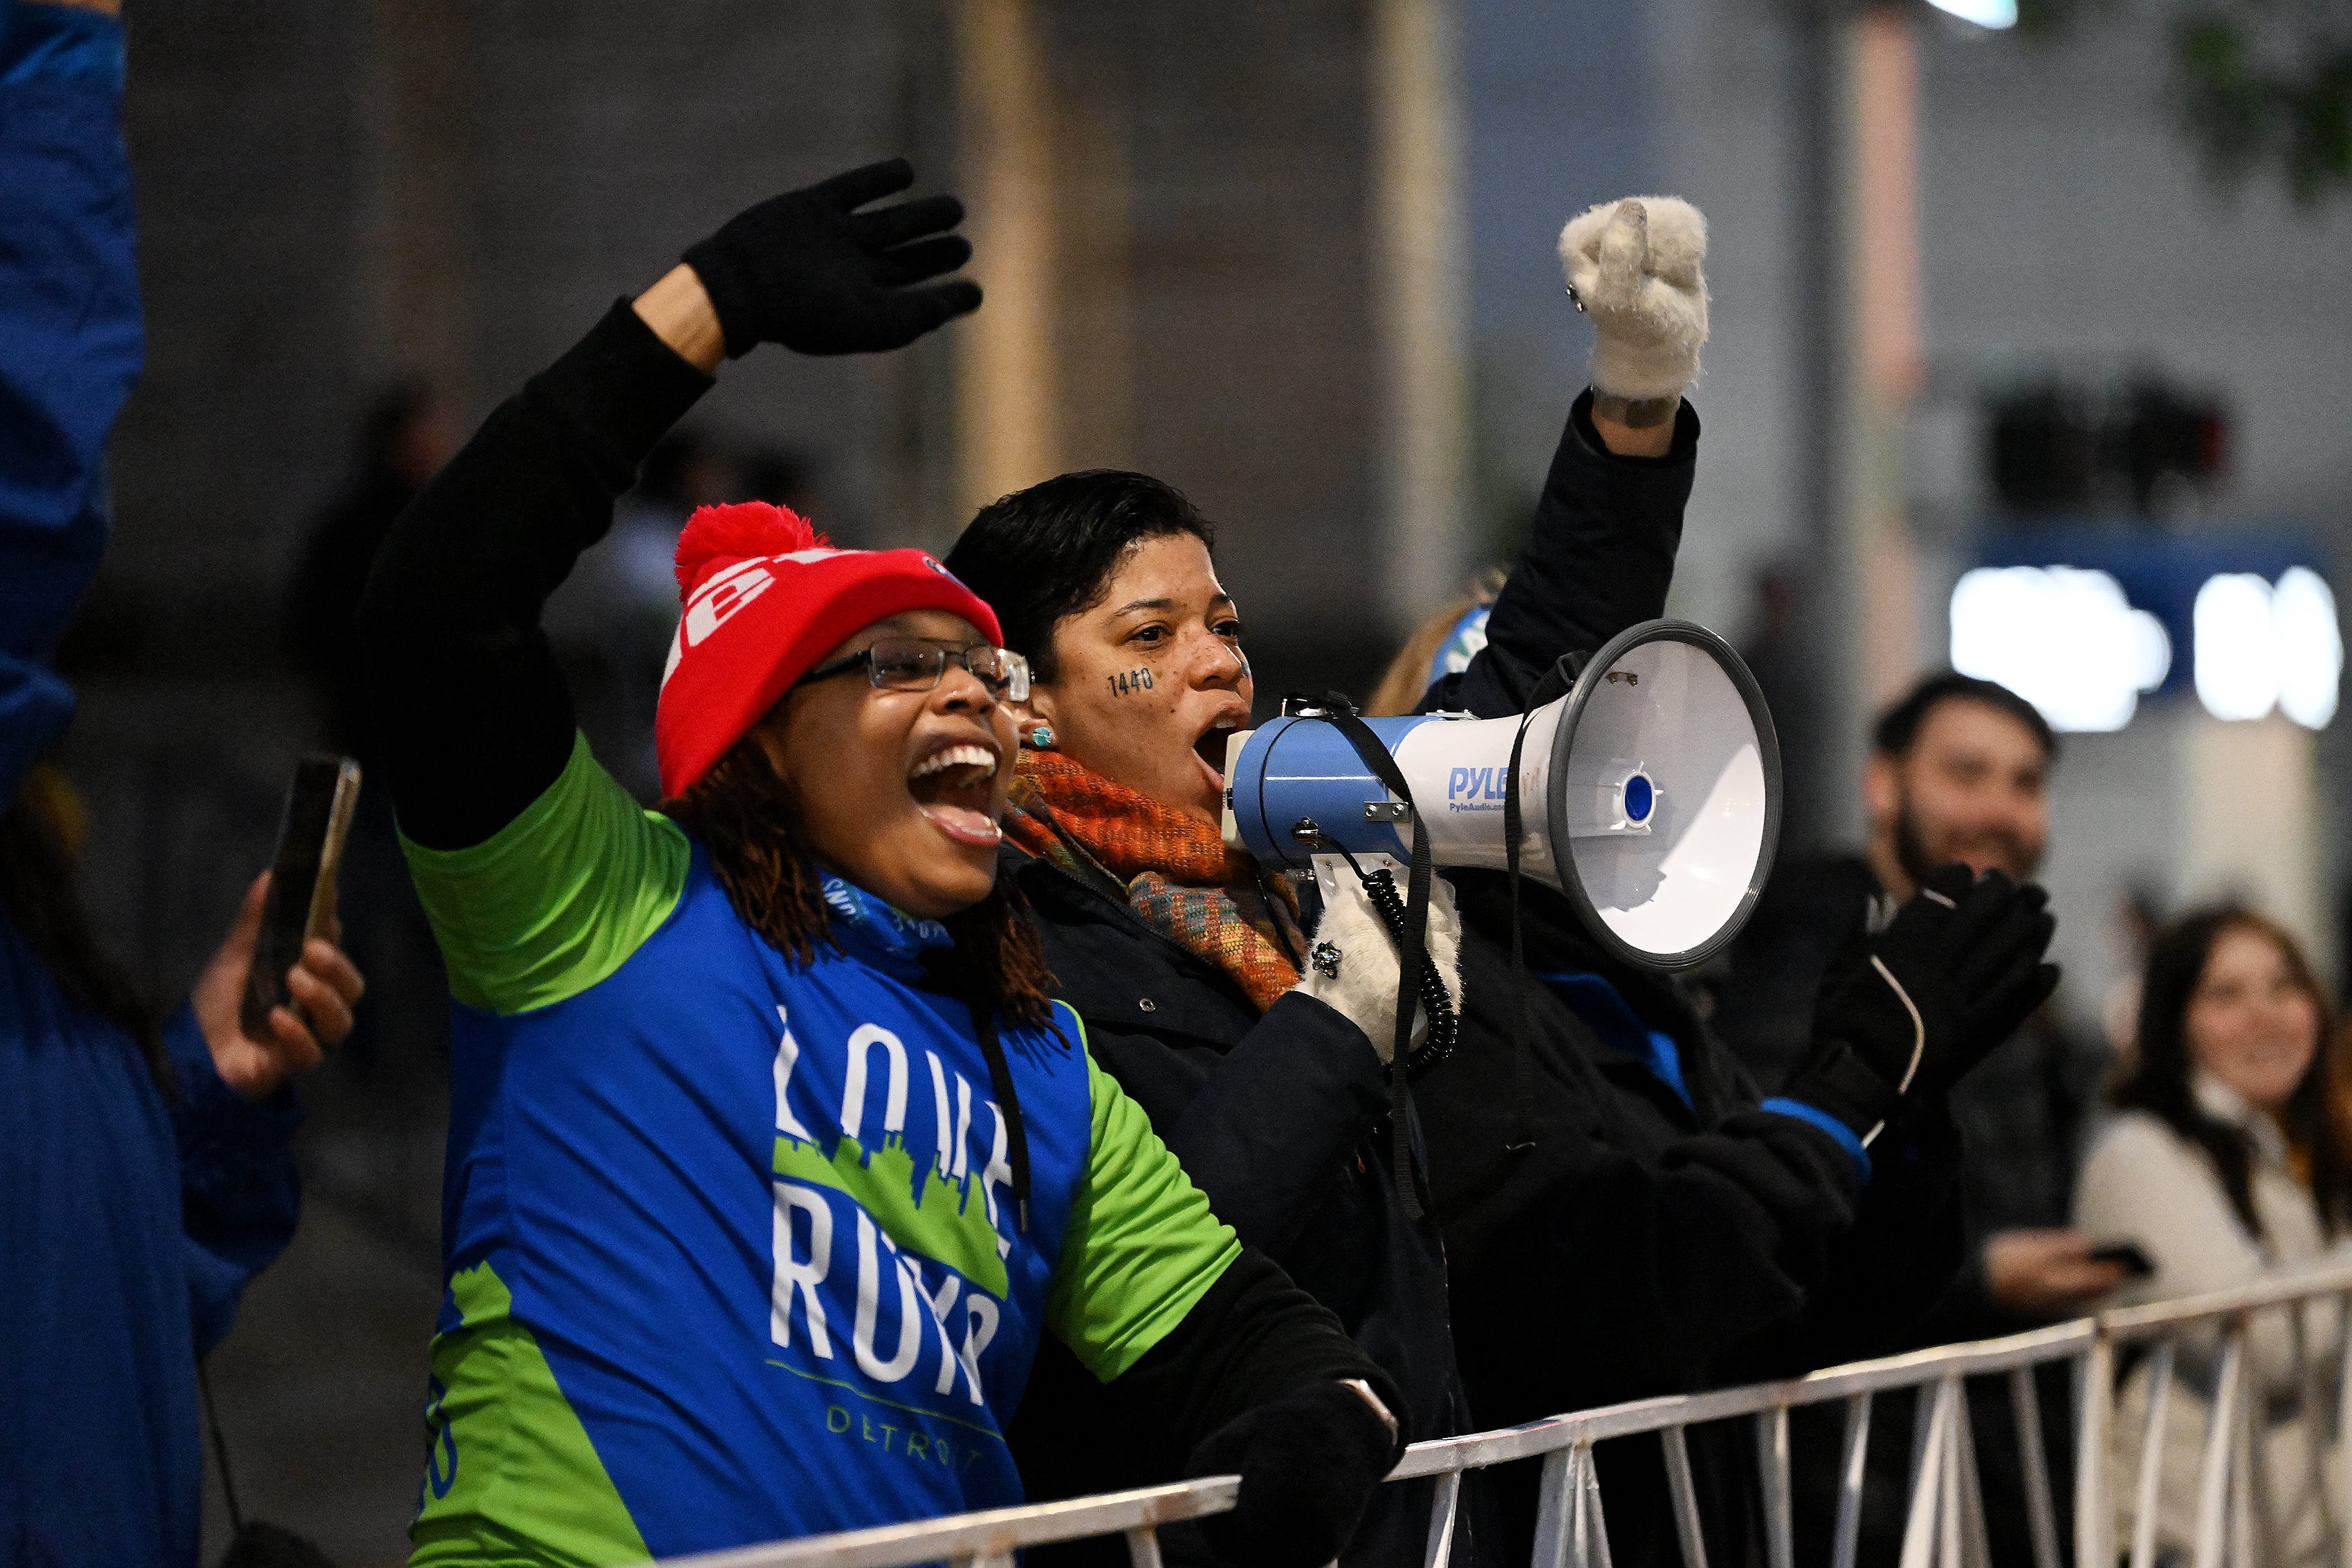 From left, Micah Johnson, 34, of Detroit and Rebecca Hason, 44, of Saline from the Love Runs organization cheer on the runners at the start of the Detroit Free Press Marathon in Detroit on Oct. 15, 2023.